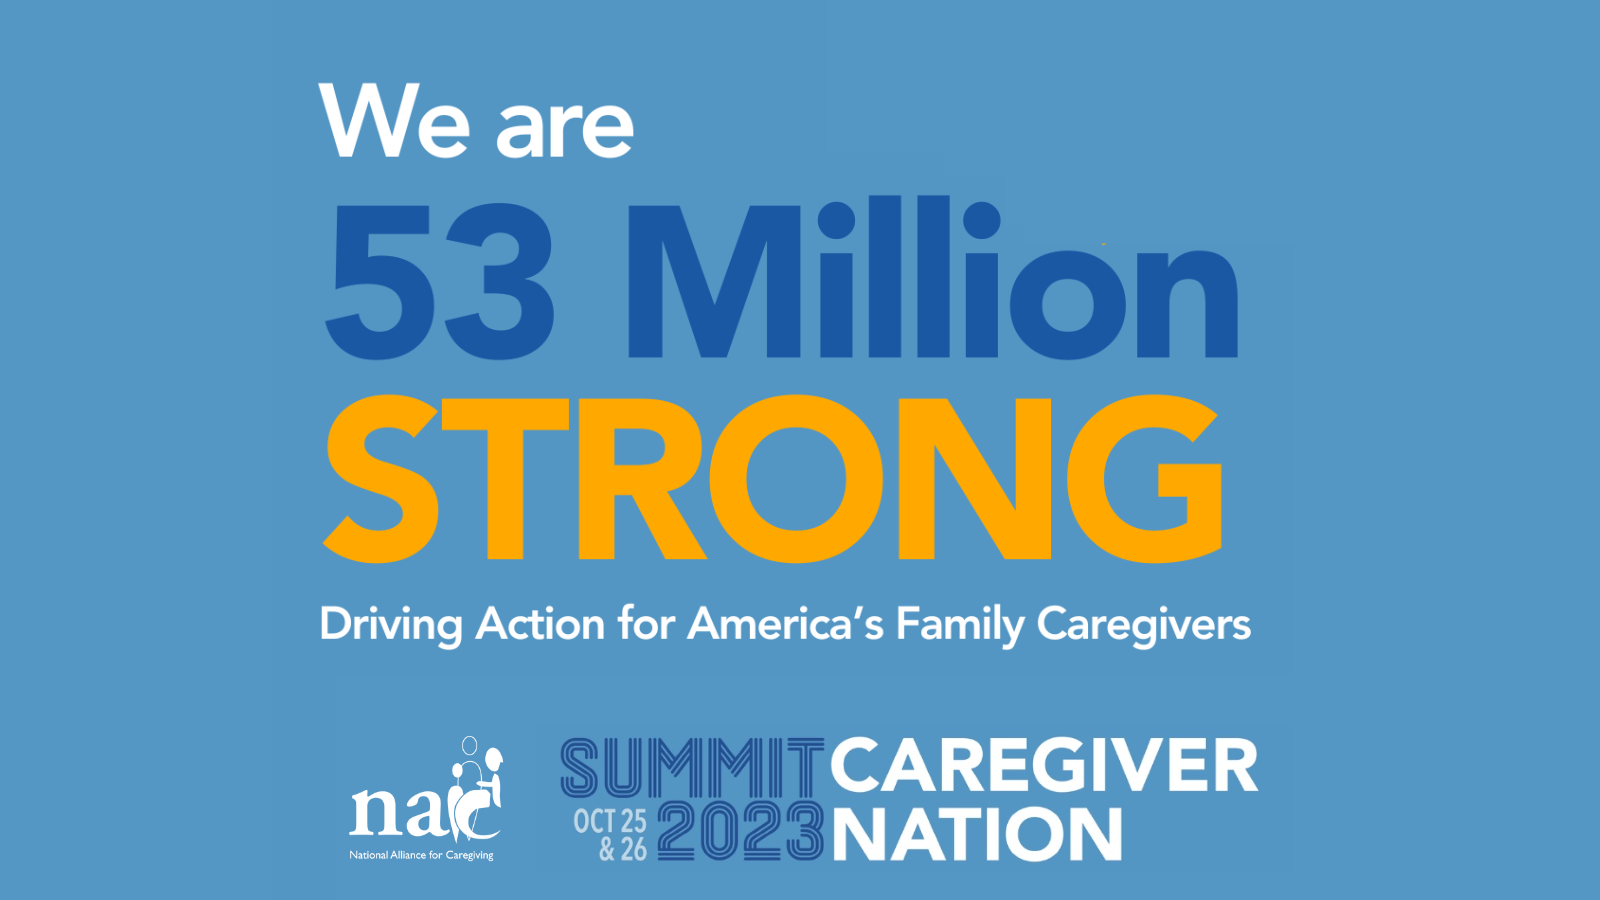 Caregiver Nation Summit Drives Action for Family Caregivers on Capitol Hill